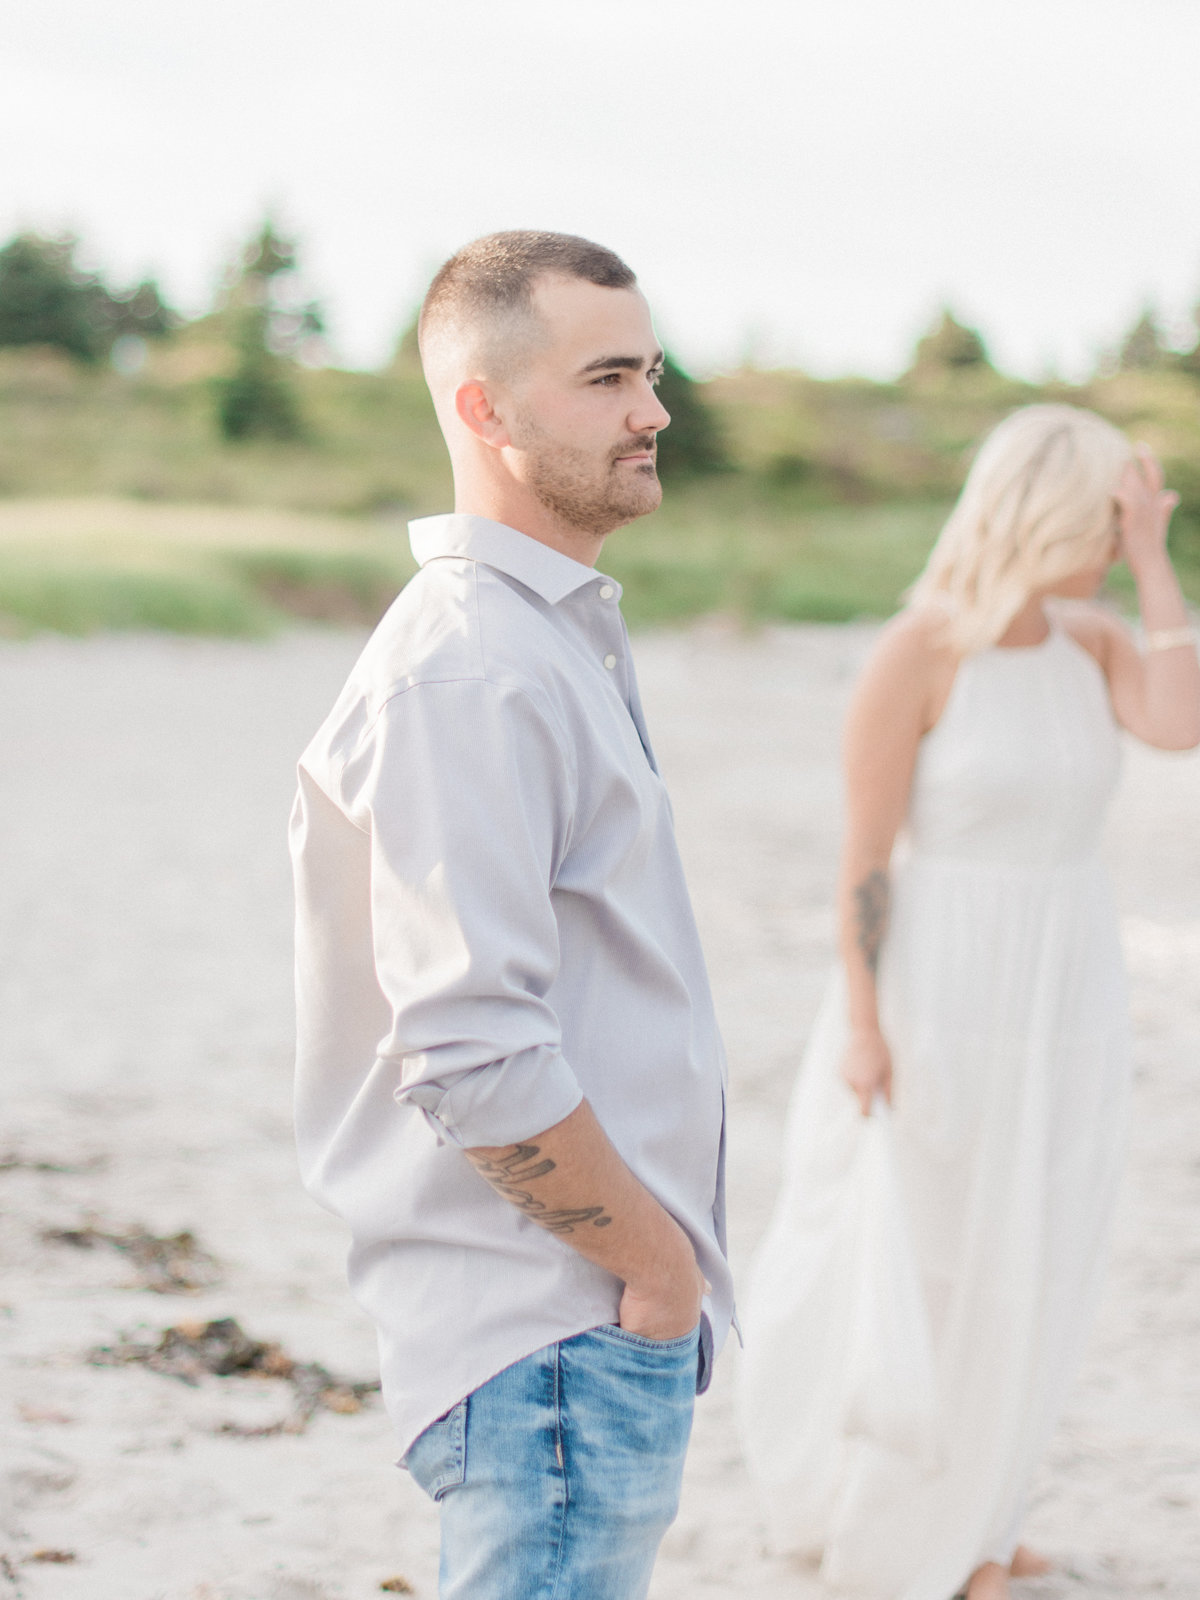 Jacqueline Anne Photography  - Hailey and Shea - Crystal Crescent Beach Engagement-56